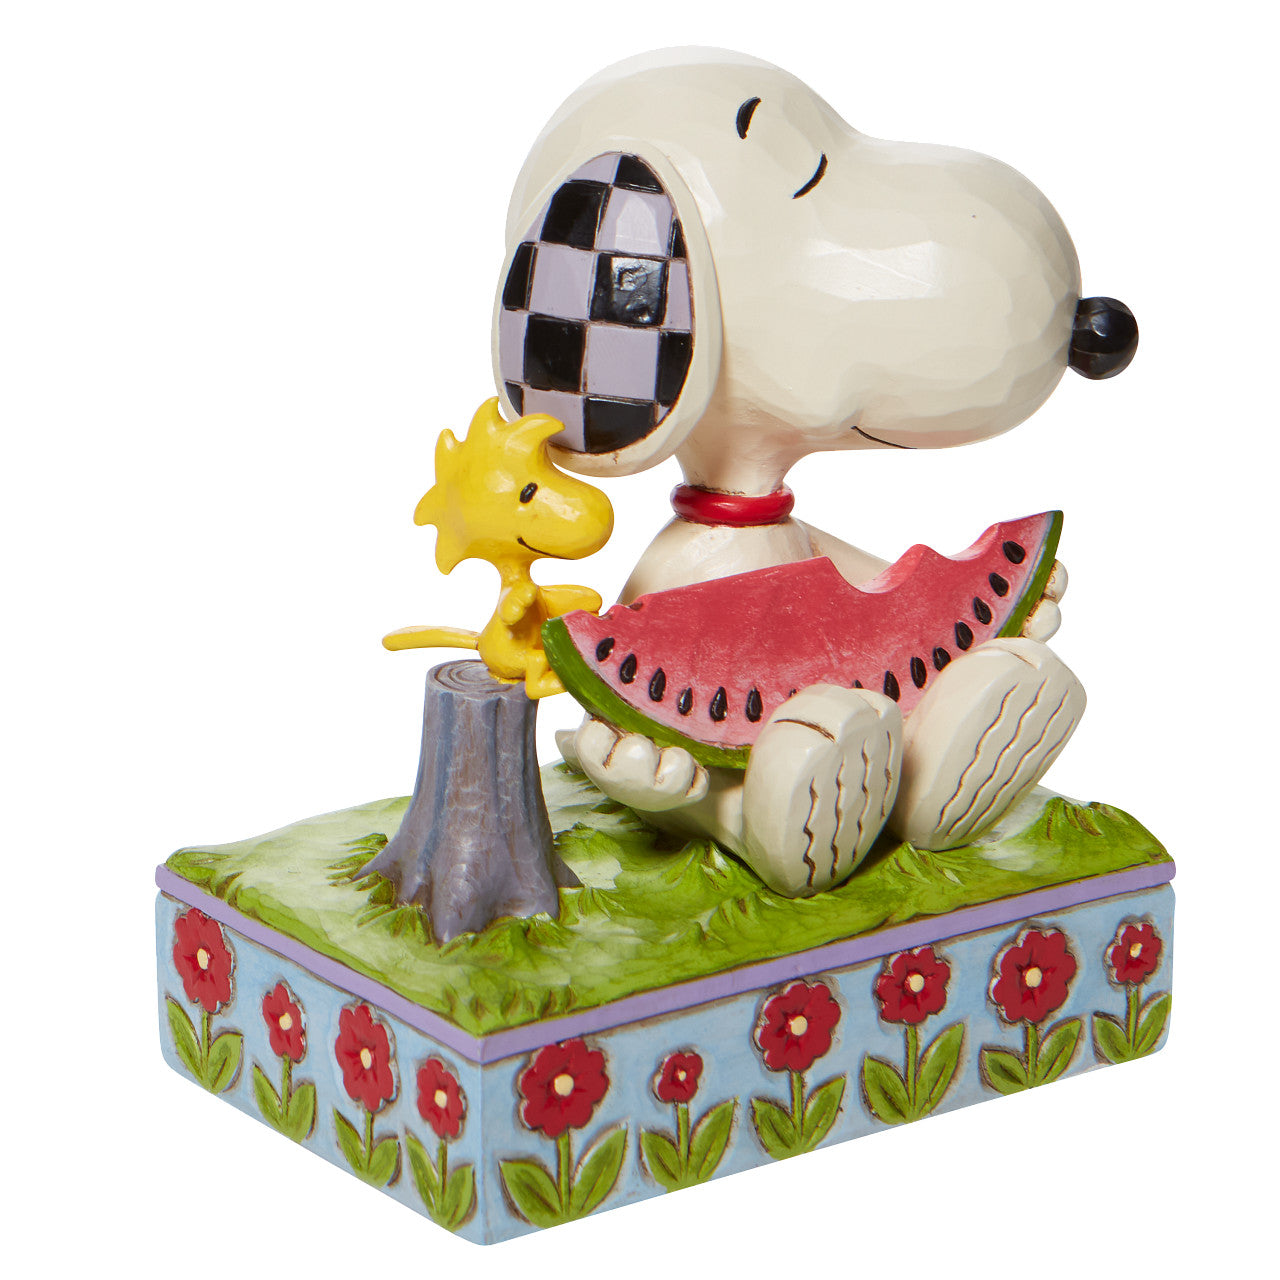 Snoopy and Woodstock eating Watermelon